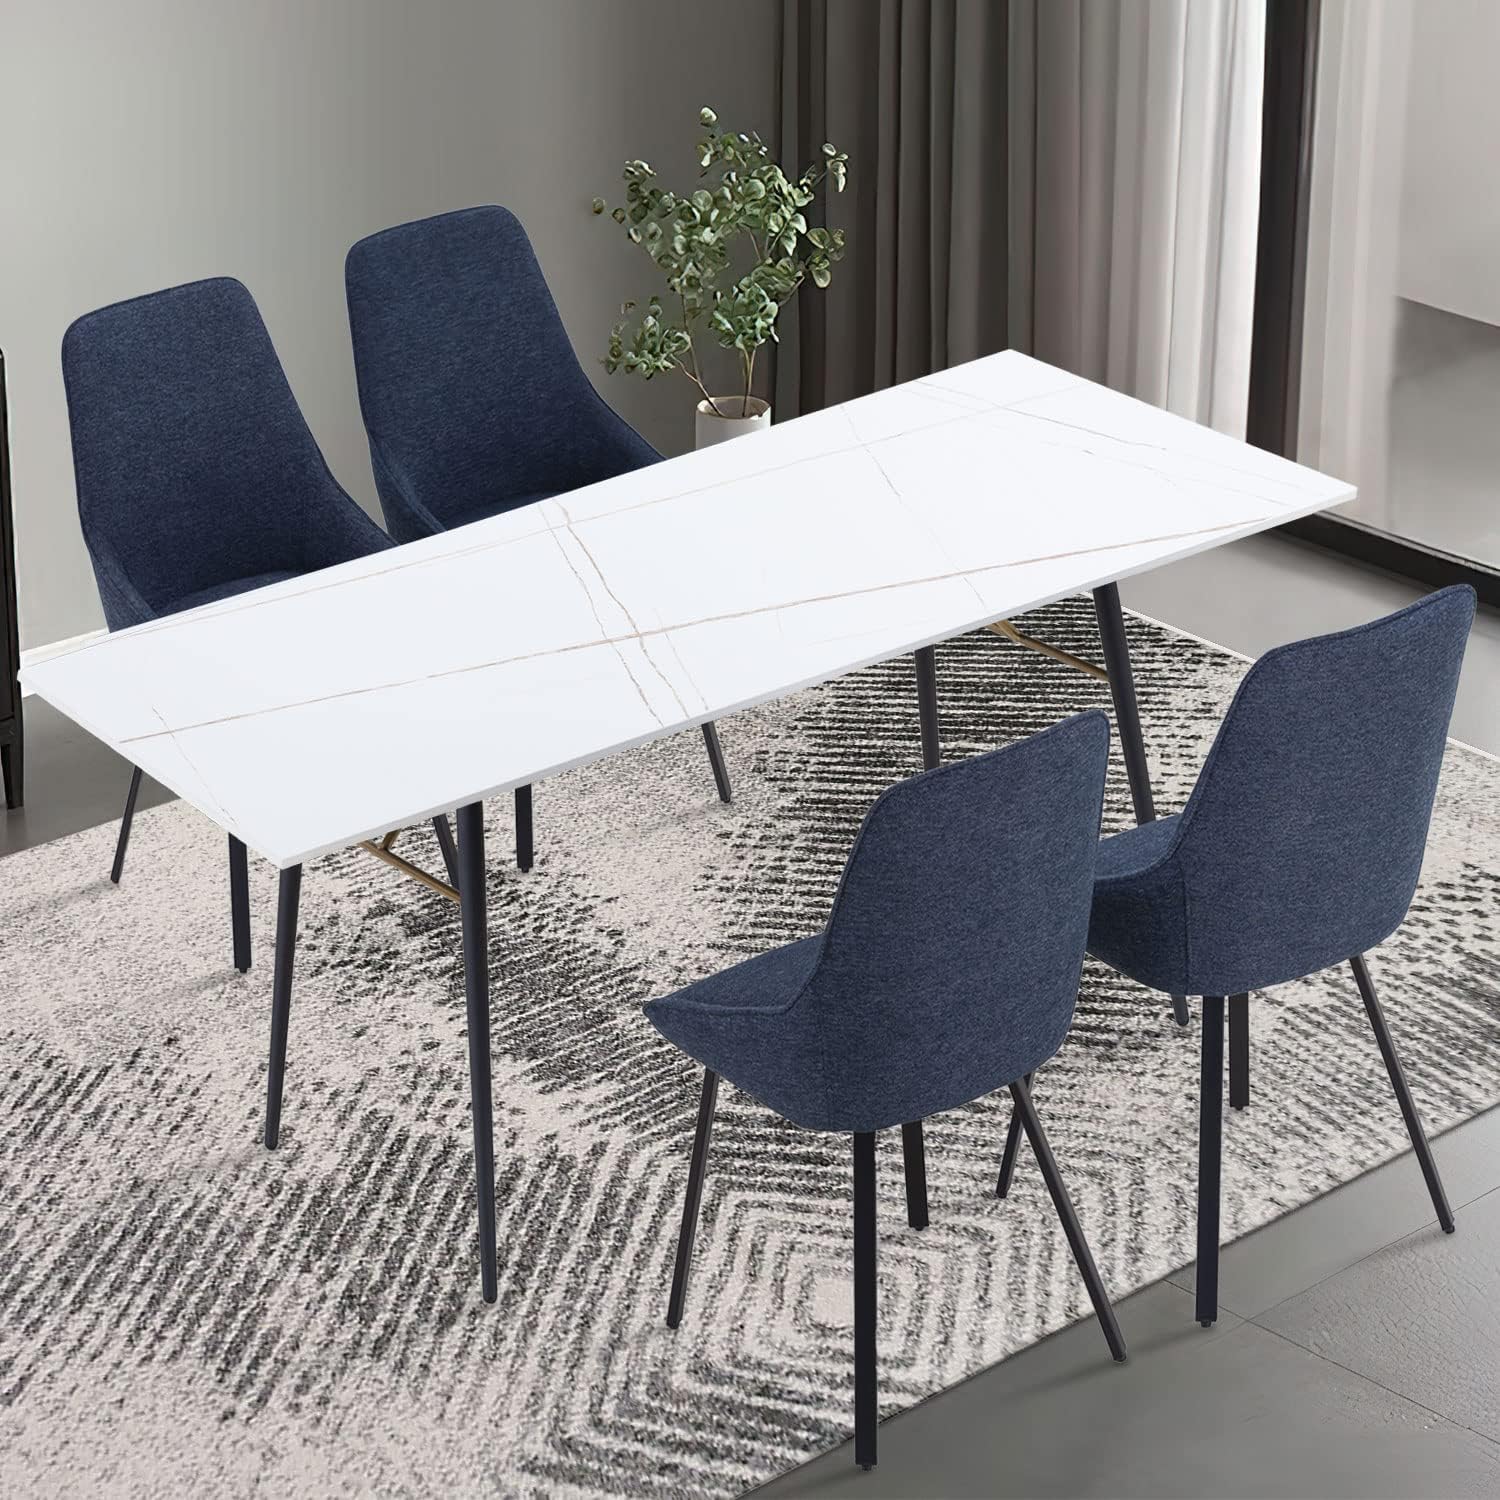 WILLIAMSPACE 70 Dining Table with Sintered Stone Top and Metal Legs, Modern Slate Dining Table for Living Room, Dining Room, Home and Office (White)